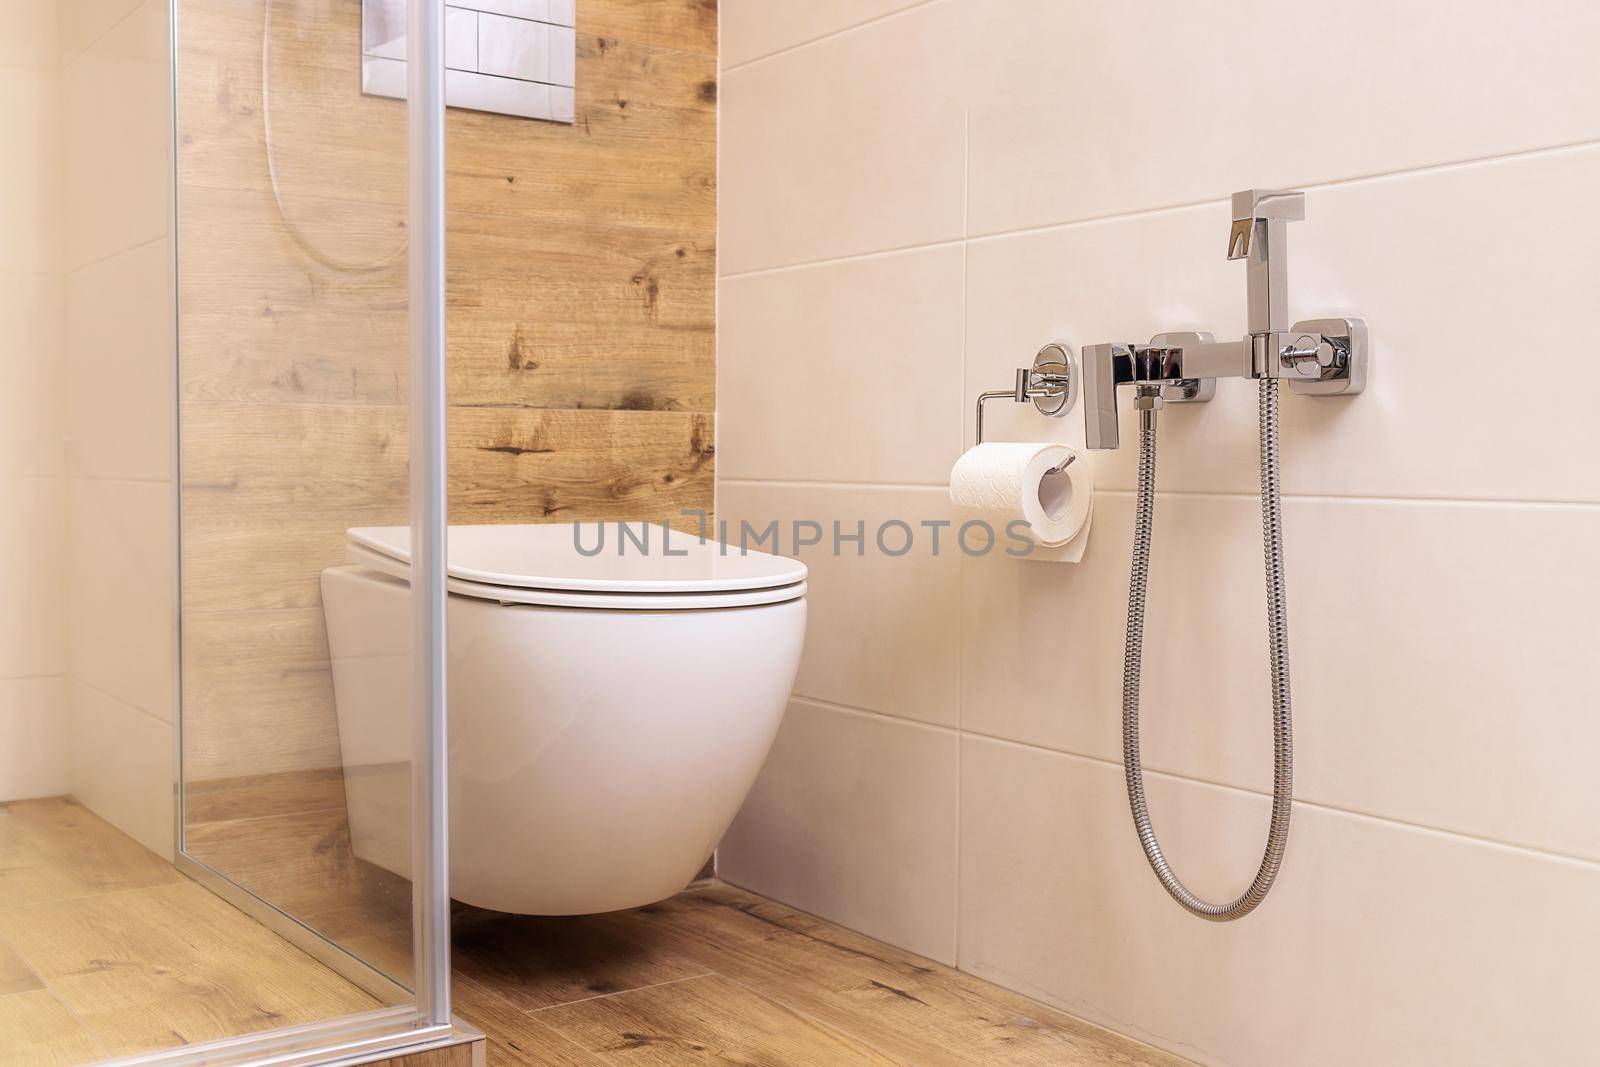 toilet and shower for bidet in the bathroom with ceramic tiles in natural colors by Ramanouskaya